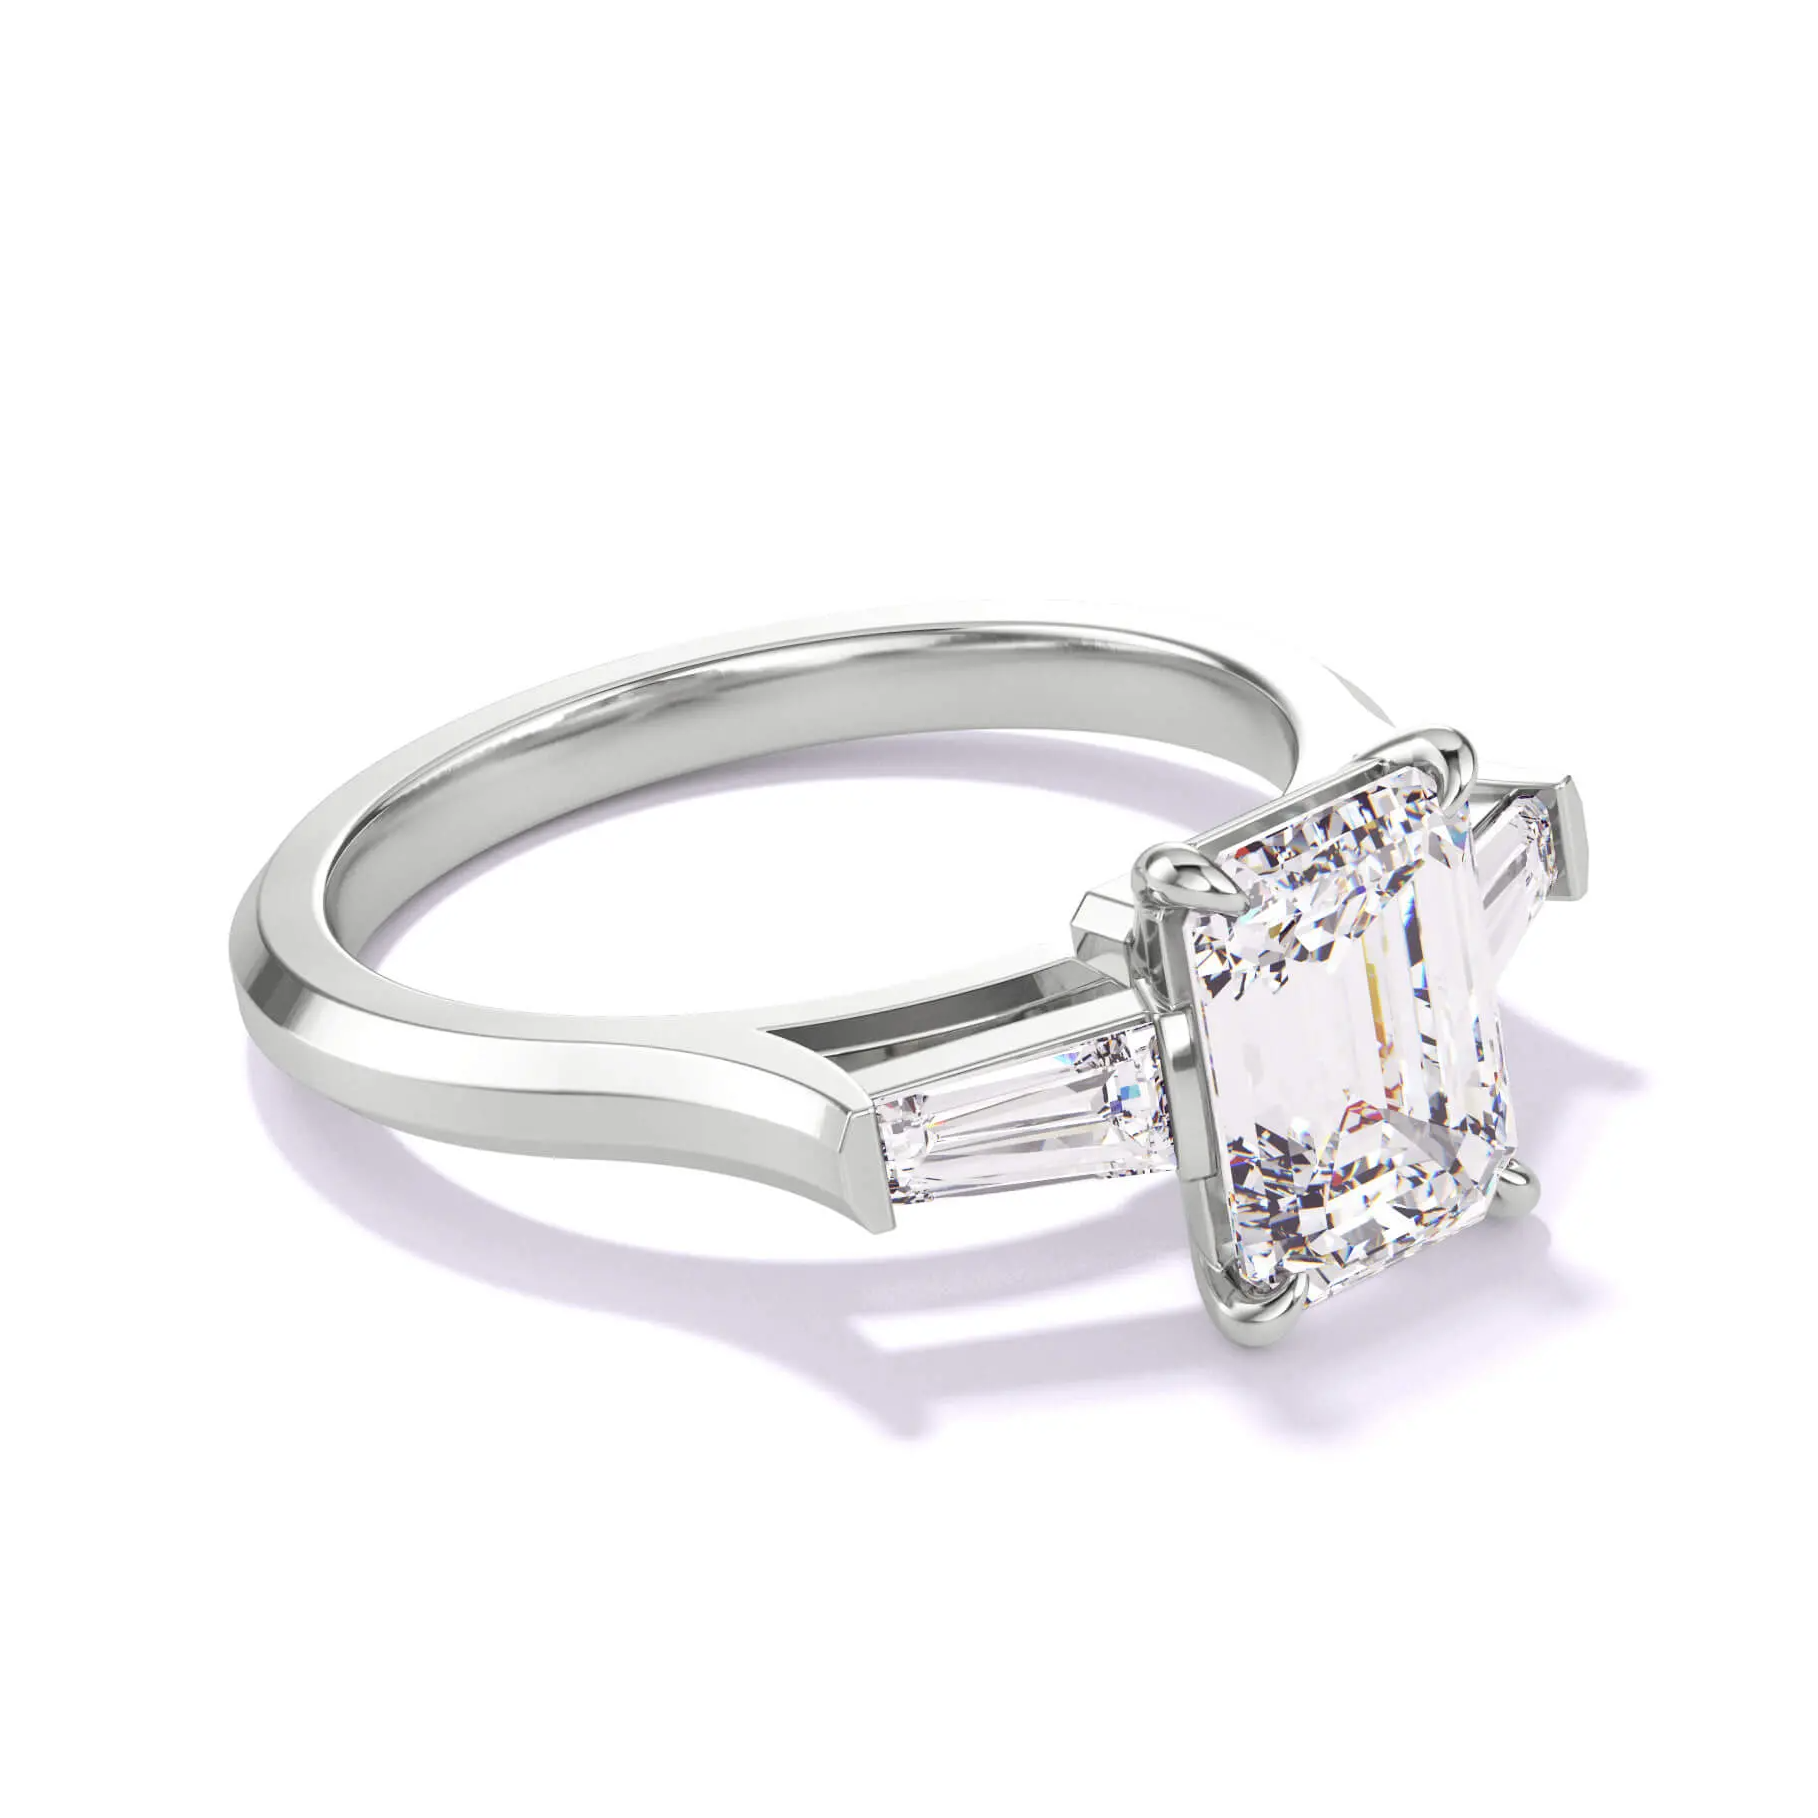 $10,000 diamond engagement ring - emerald cut with baguettes in platinum